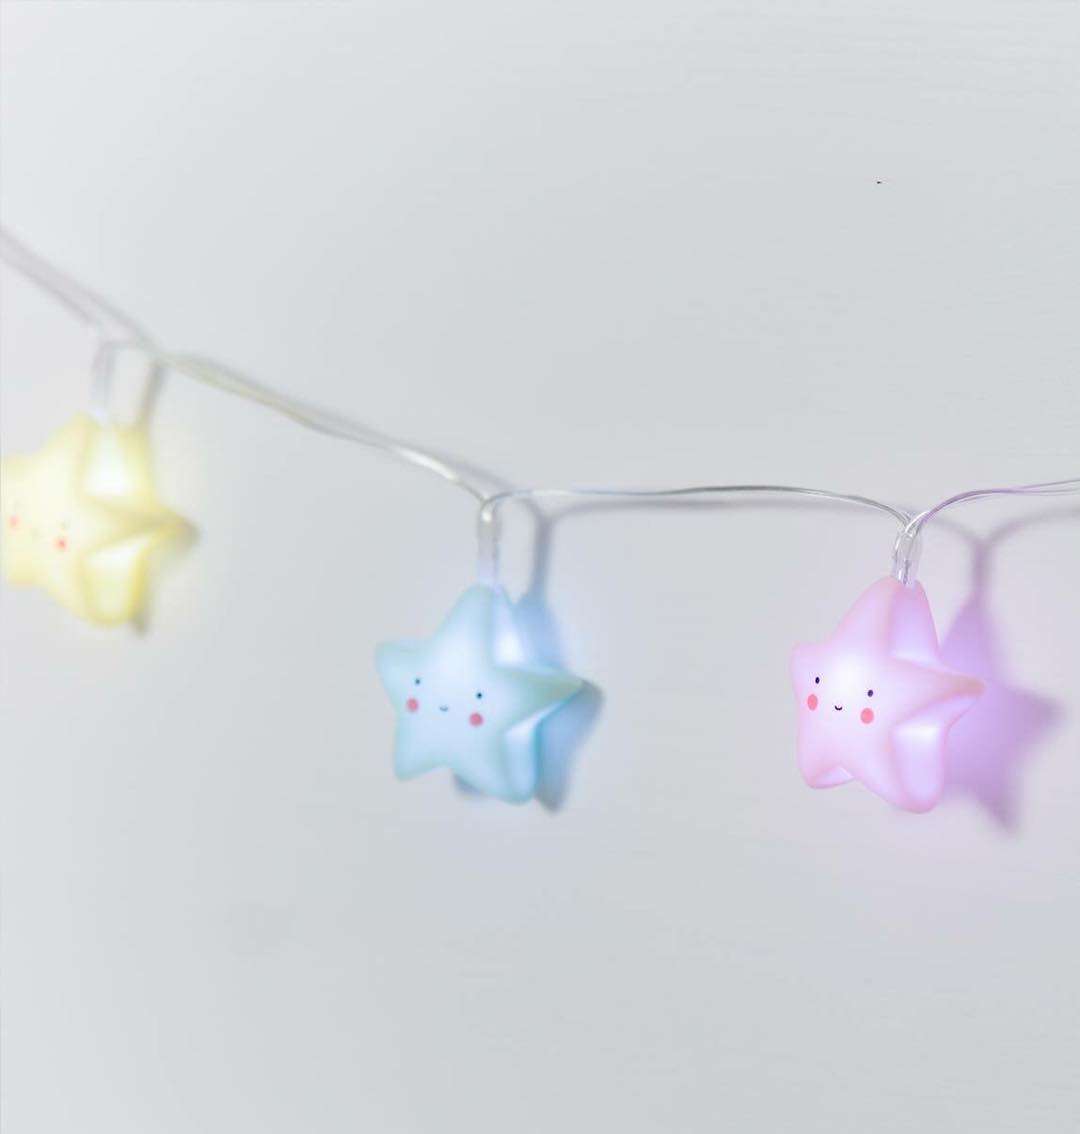 The imaginative lights of a little lovely company bring great attention to any nursery. #starlight #stringlights #fun #kidsinterior #light #kidsdesign #forkids #colorful #star